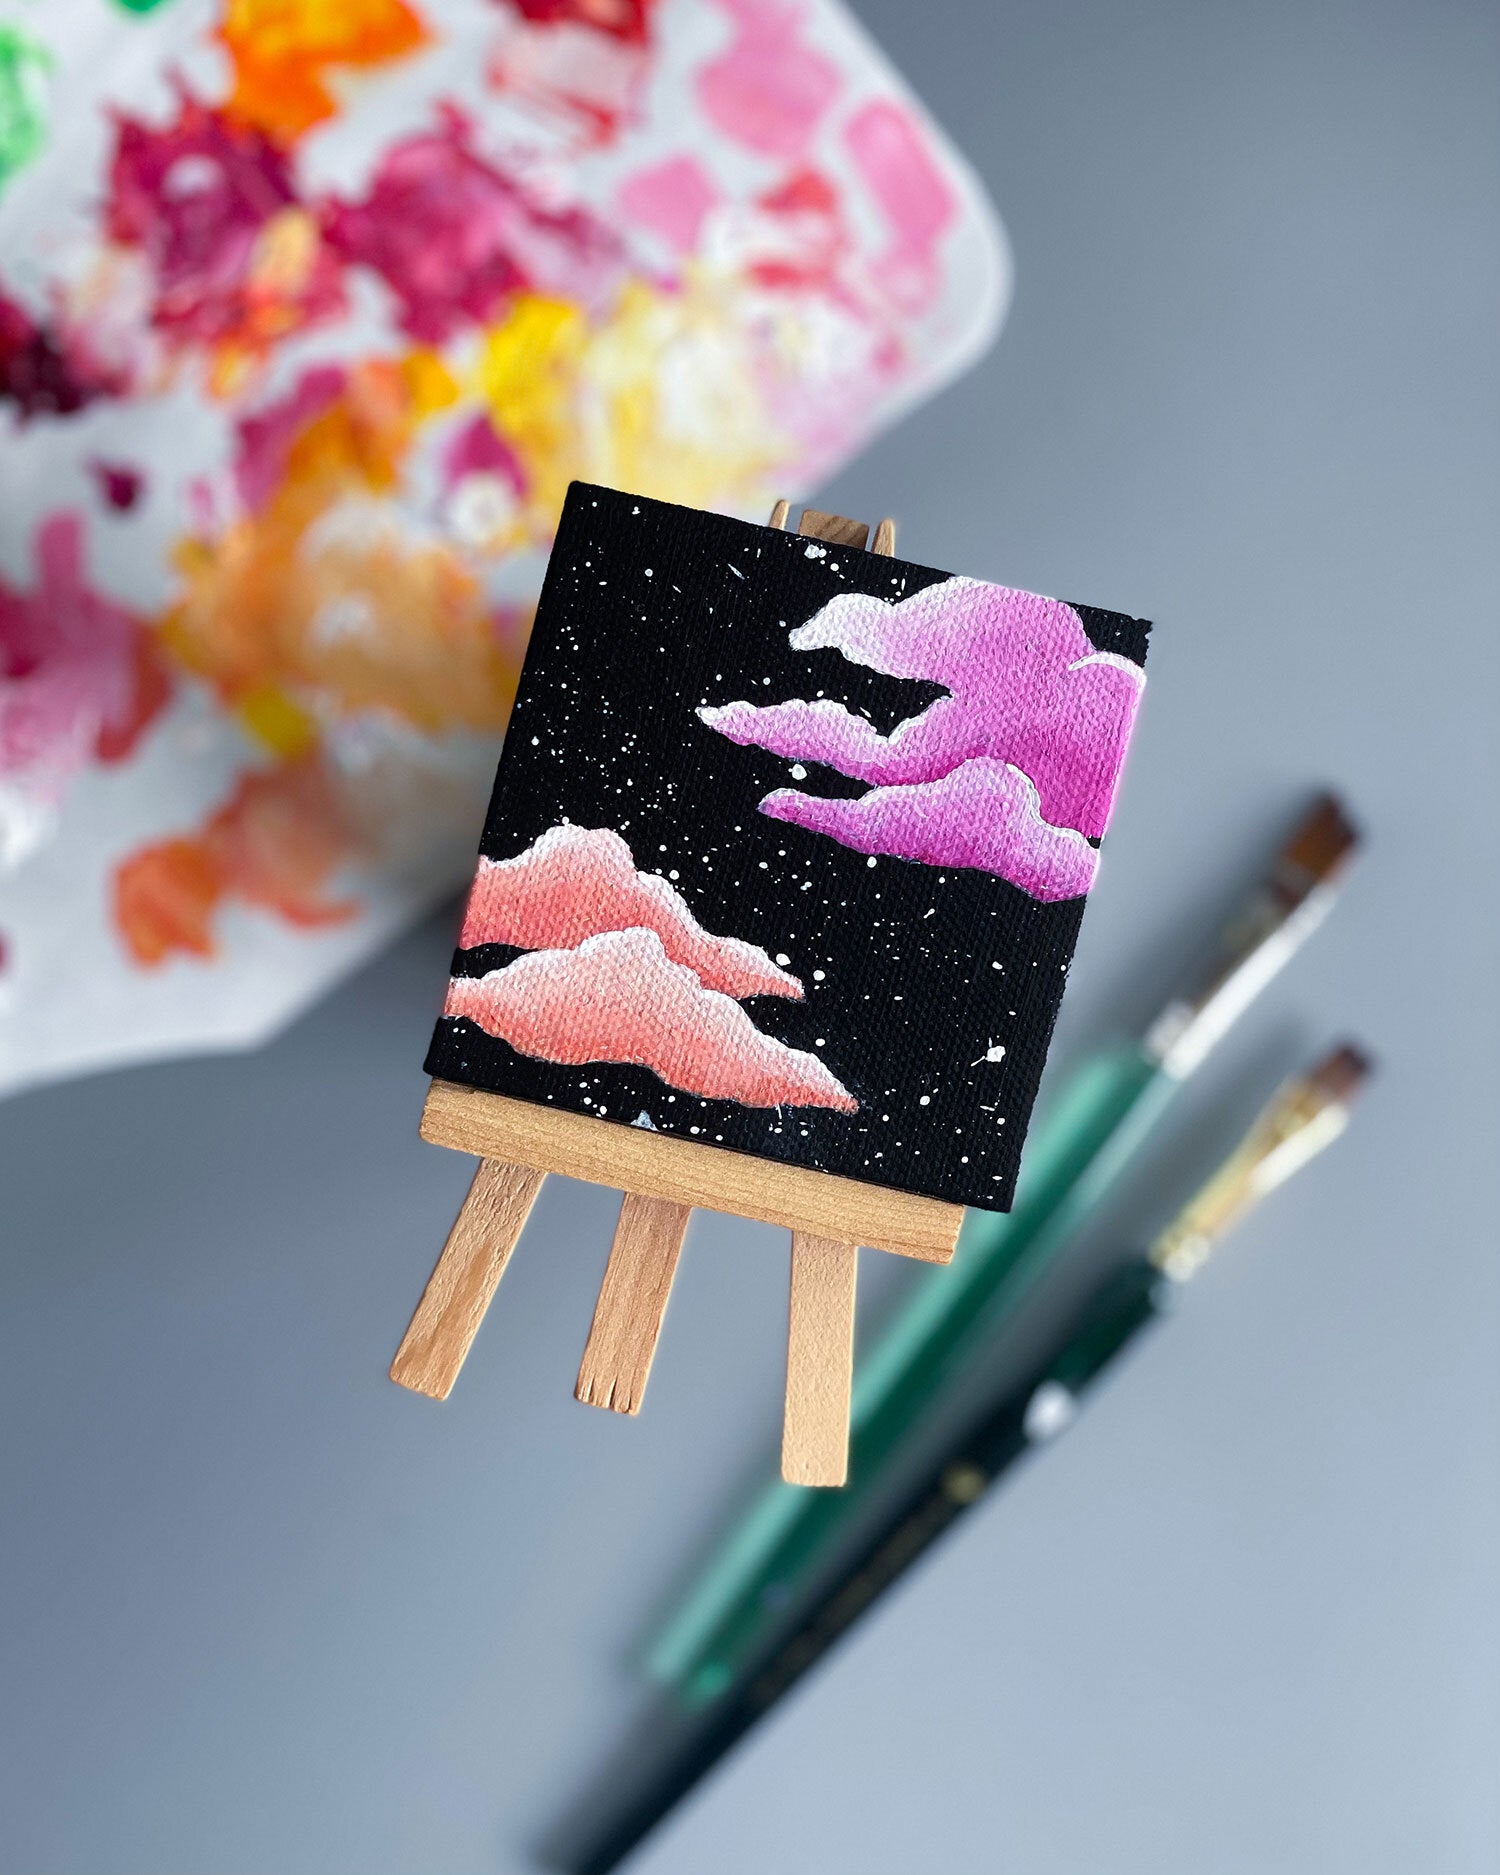 Mini Canvas for Painting with Easel, 3'X3'Canvas with Small Wooden